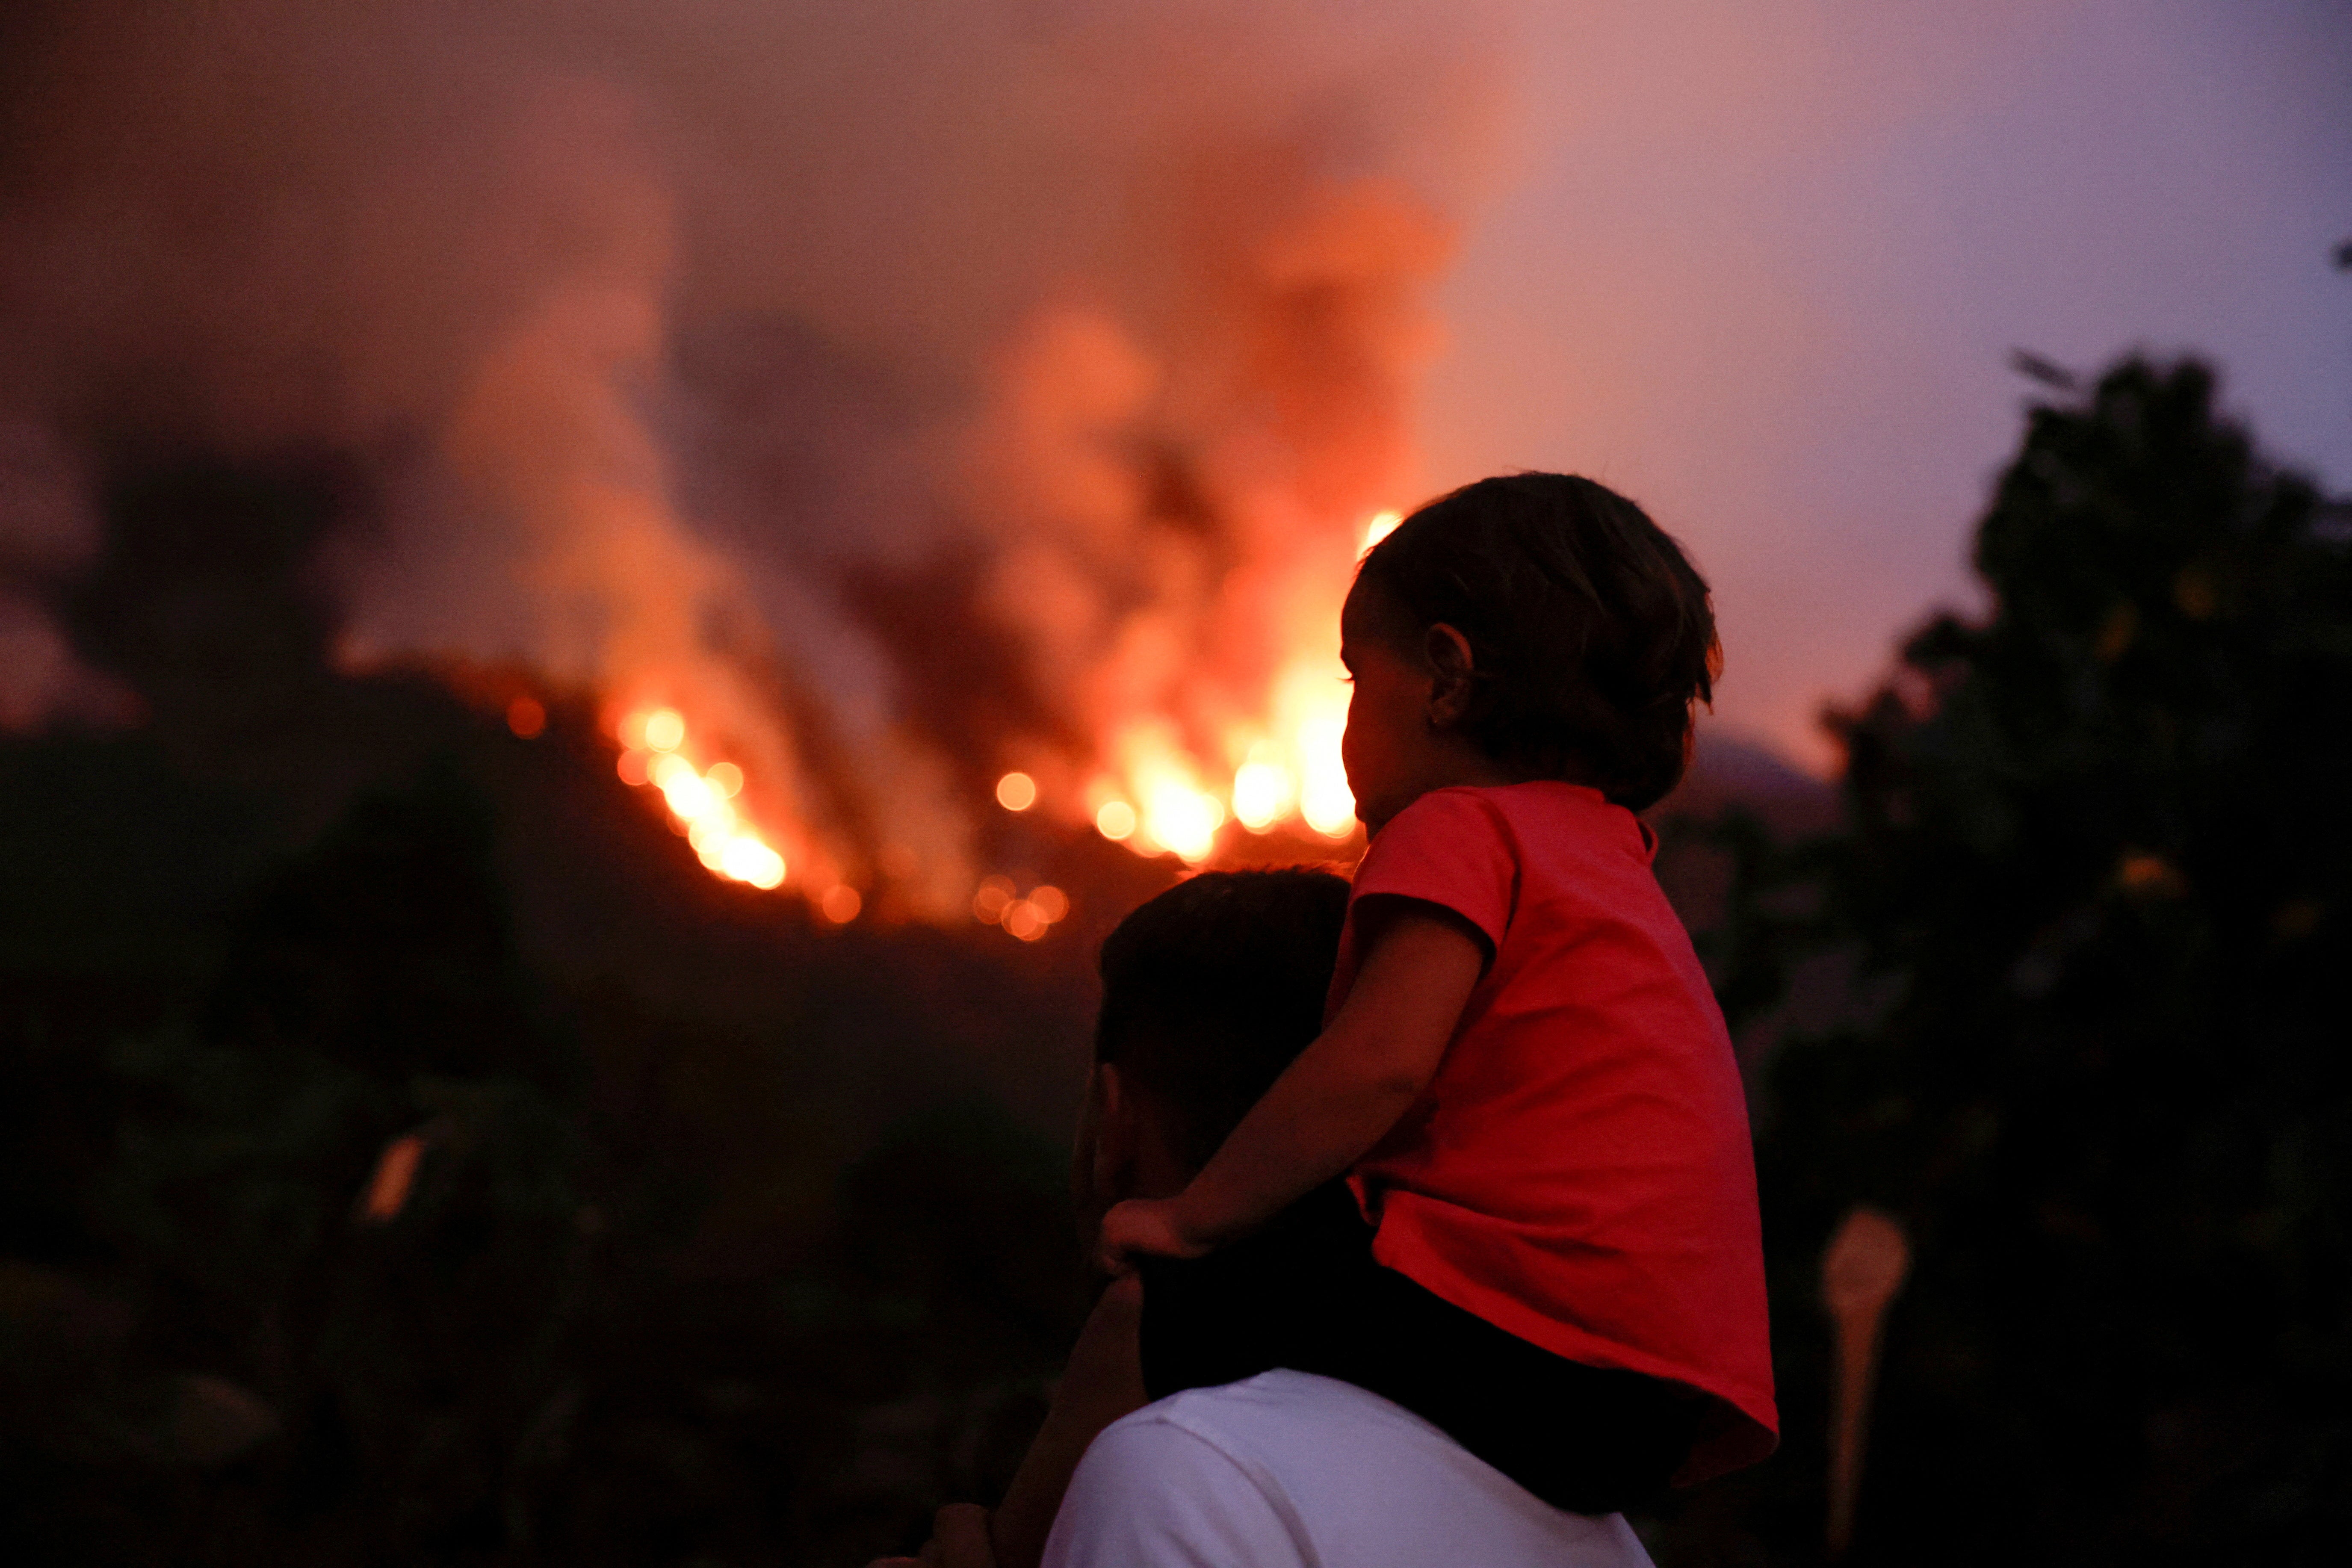 Residents of the town of Aguamansa watch the wildfires rage out of control on the island of Tenerife